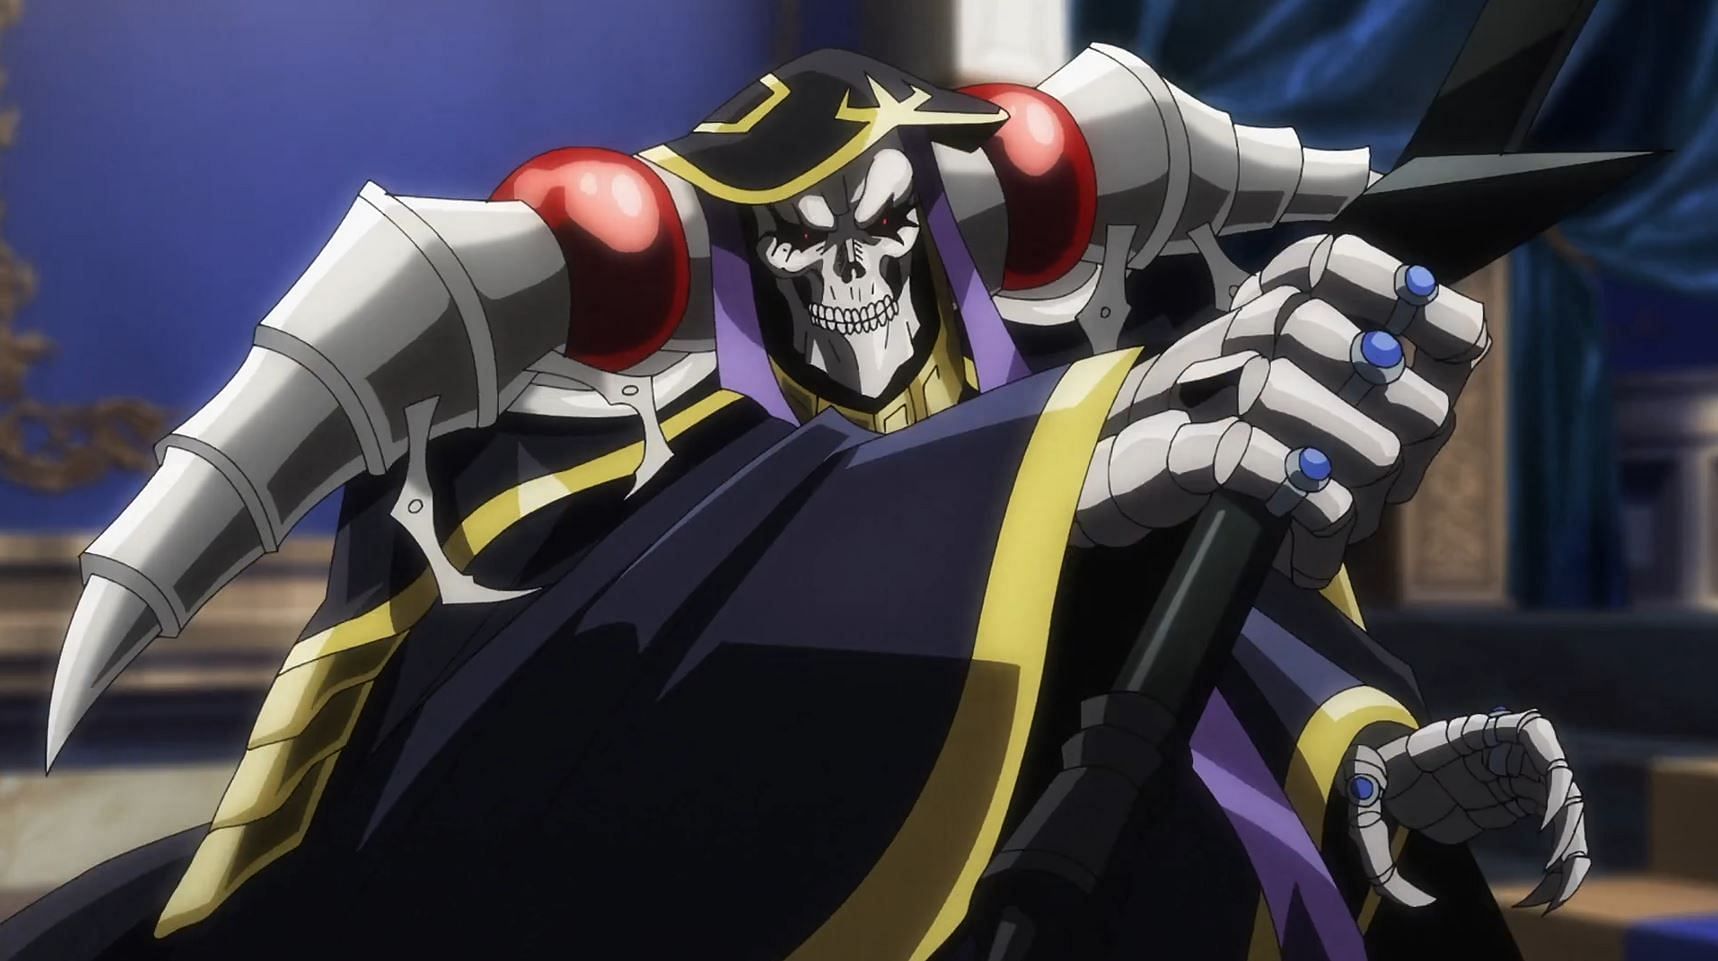 Overlord IV (Season 4) Episode 13 - Anime Review - DoubleSama